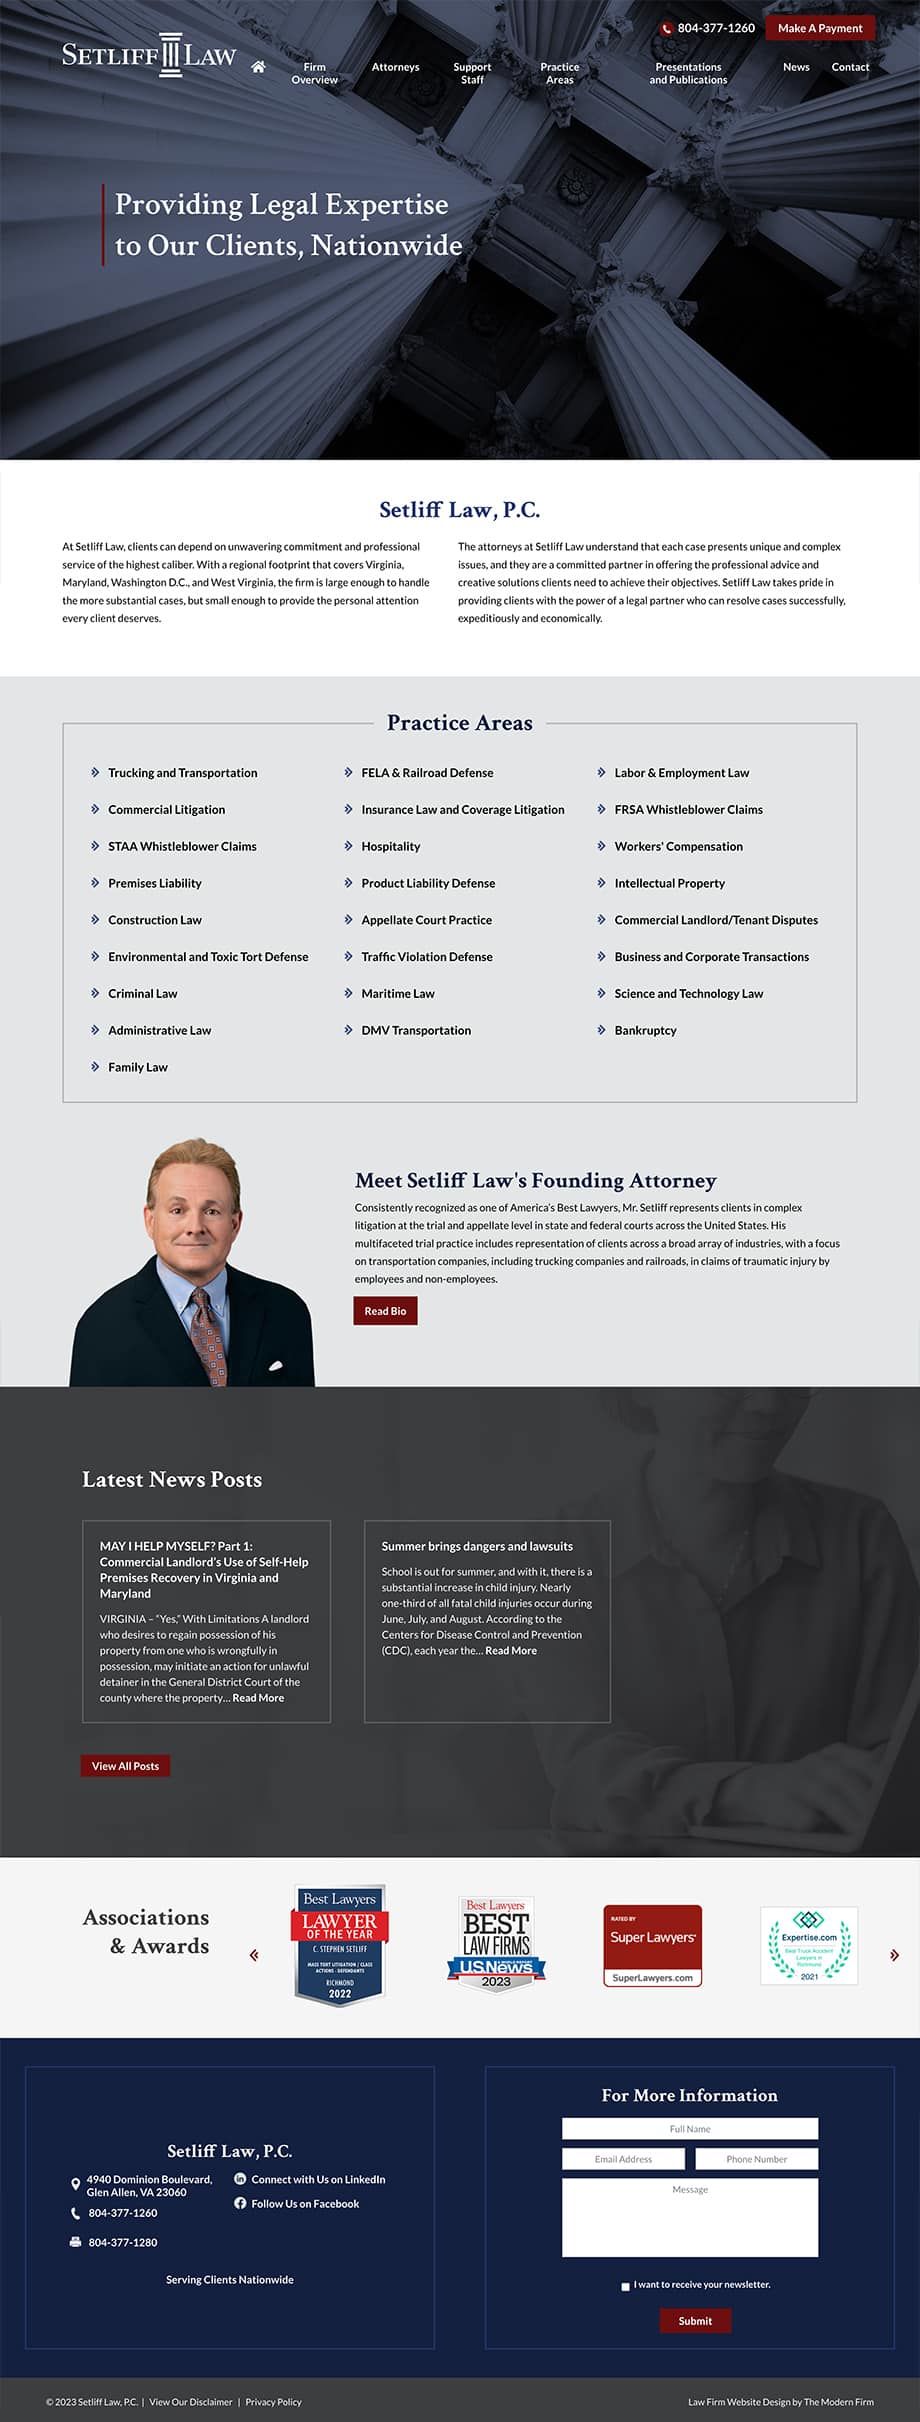 Law Firm Website for Setliff Law, P.C.